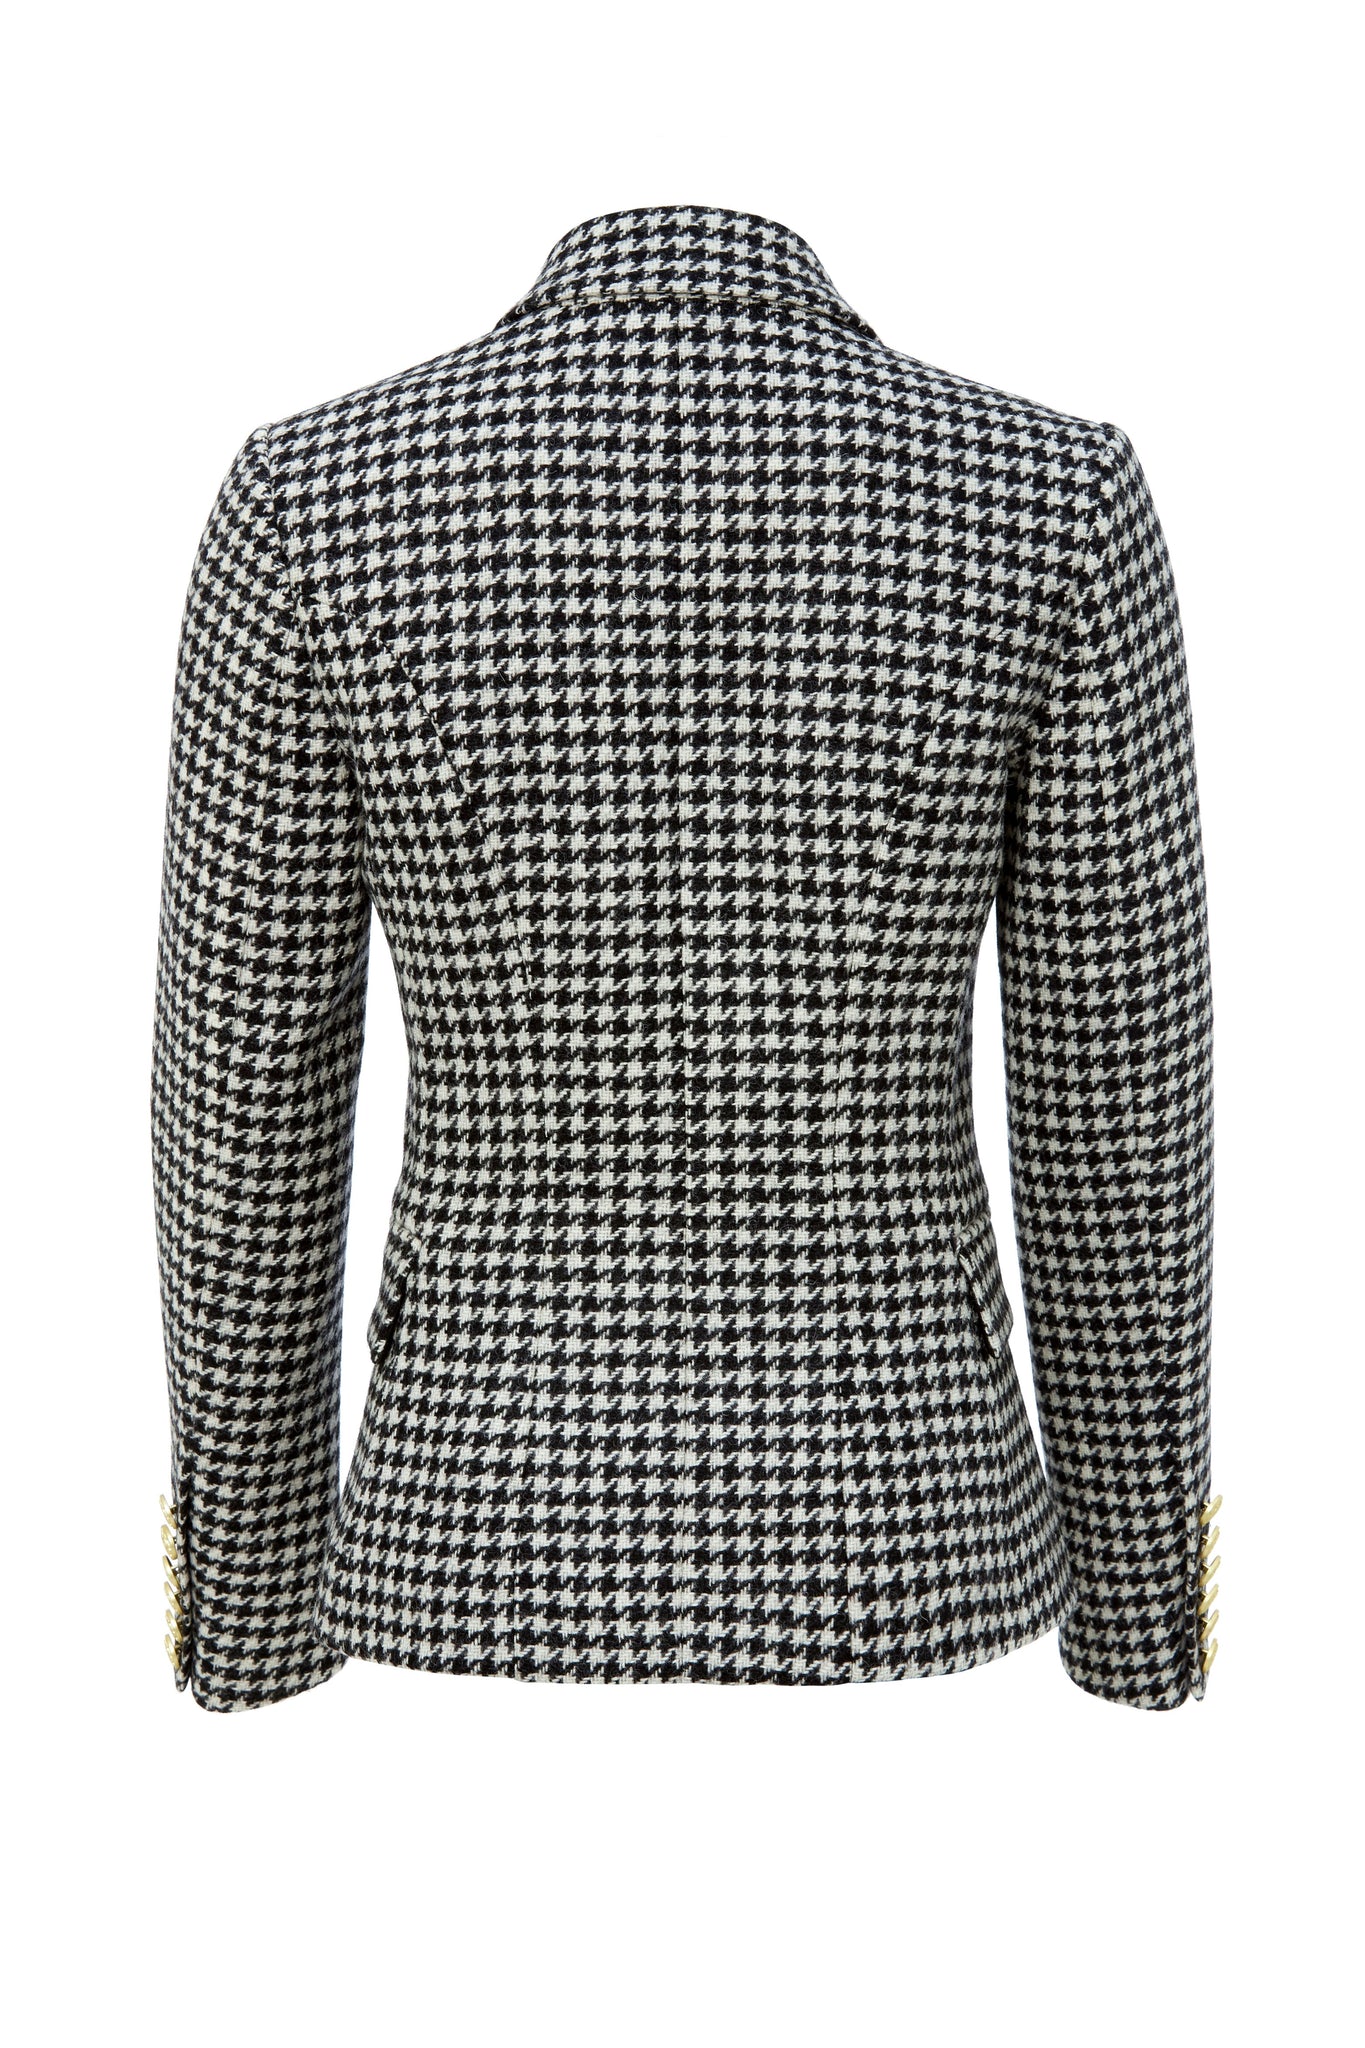 back of British made double breasted blazer that fastens with a single button hole to create a more form fitting silhouette with two pockets and gold button detailing this blazer in black and white houndstooth